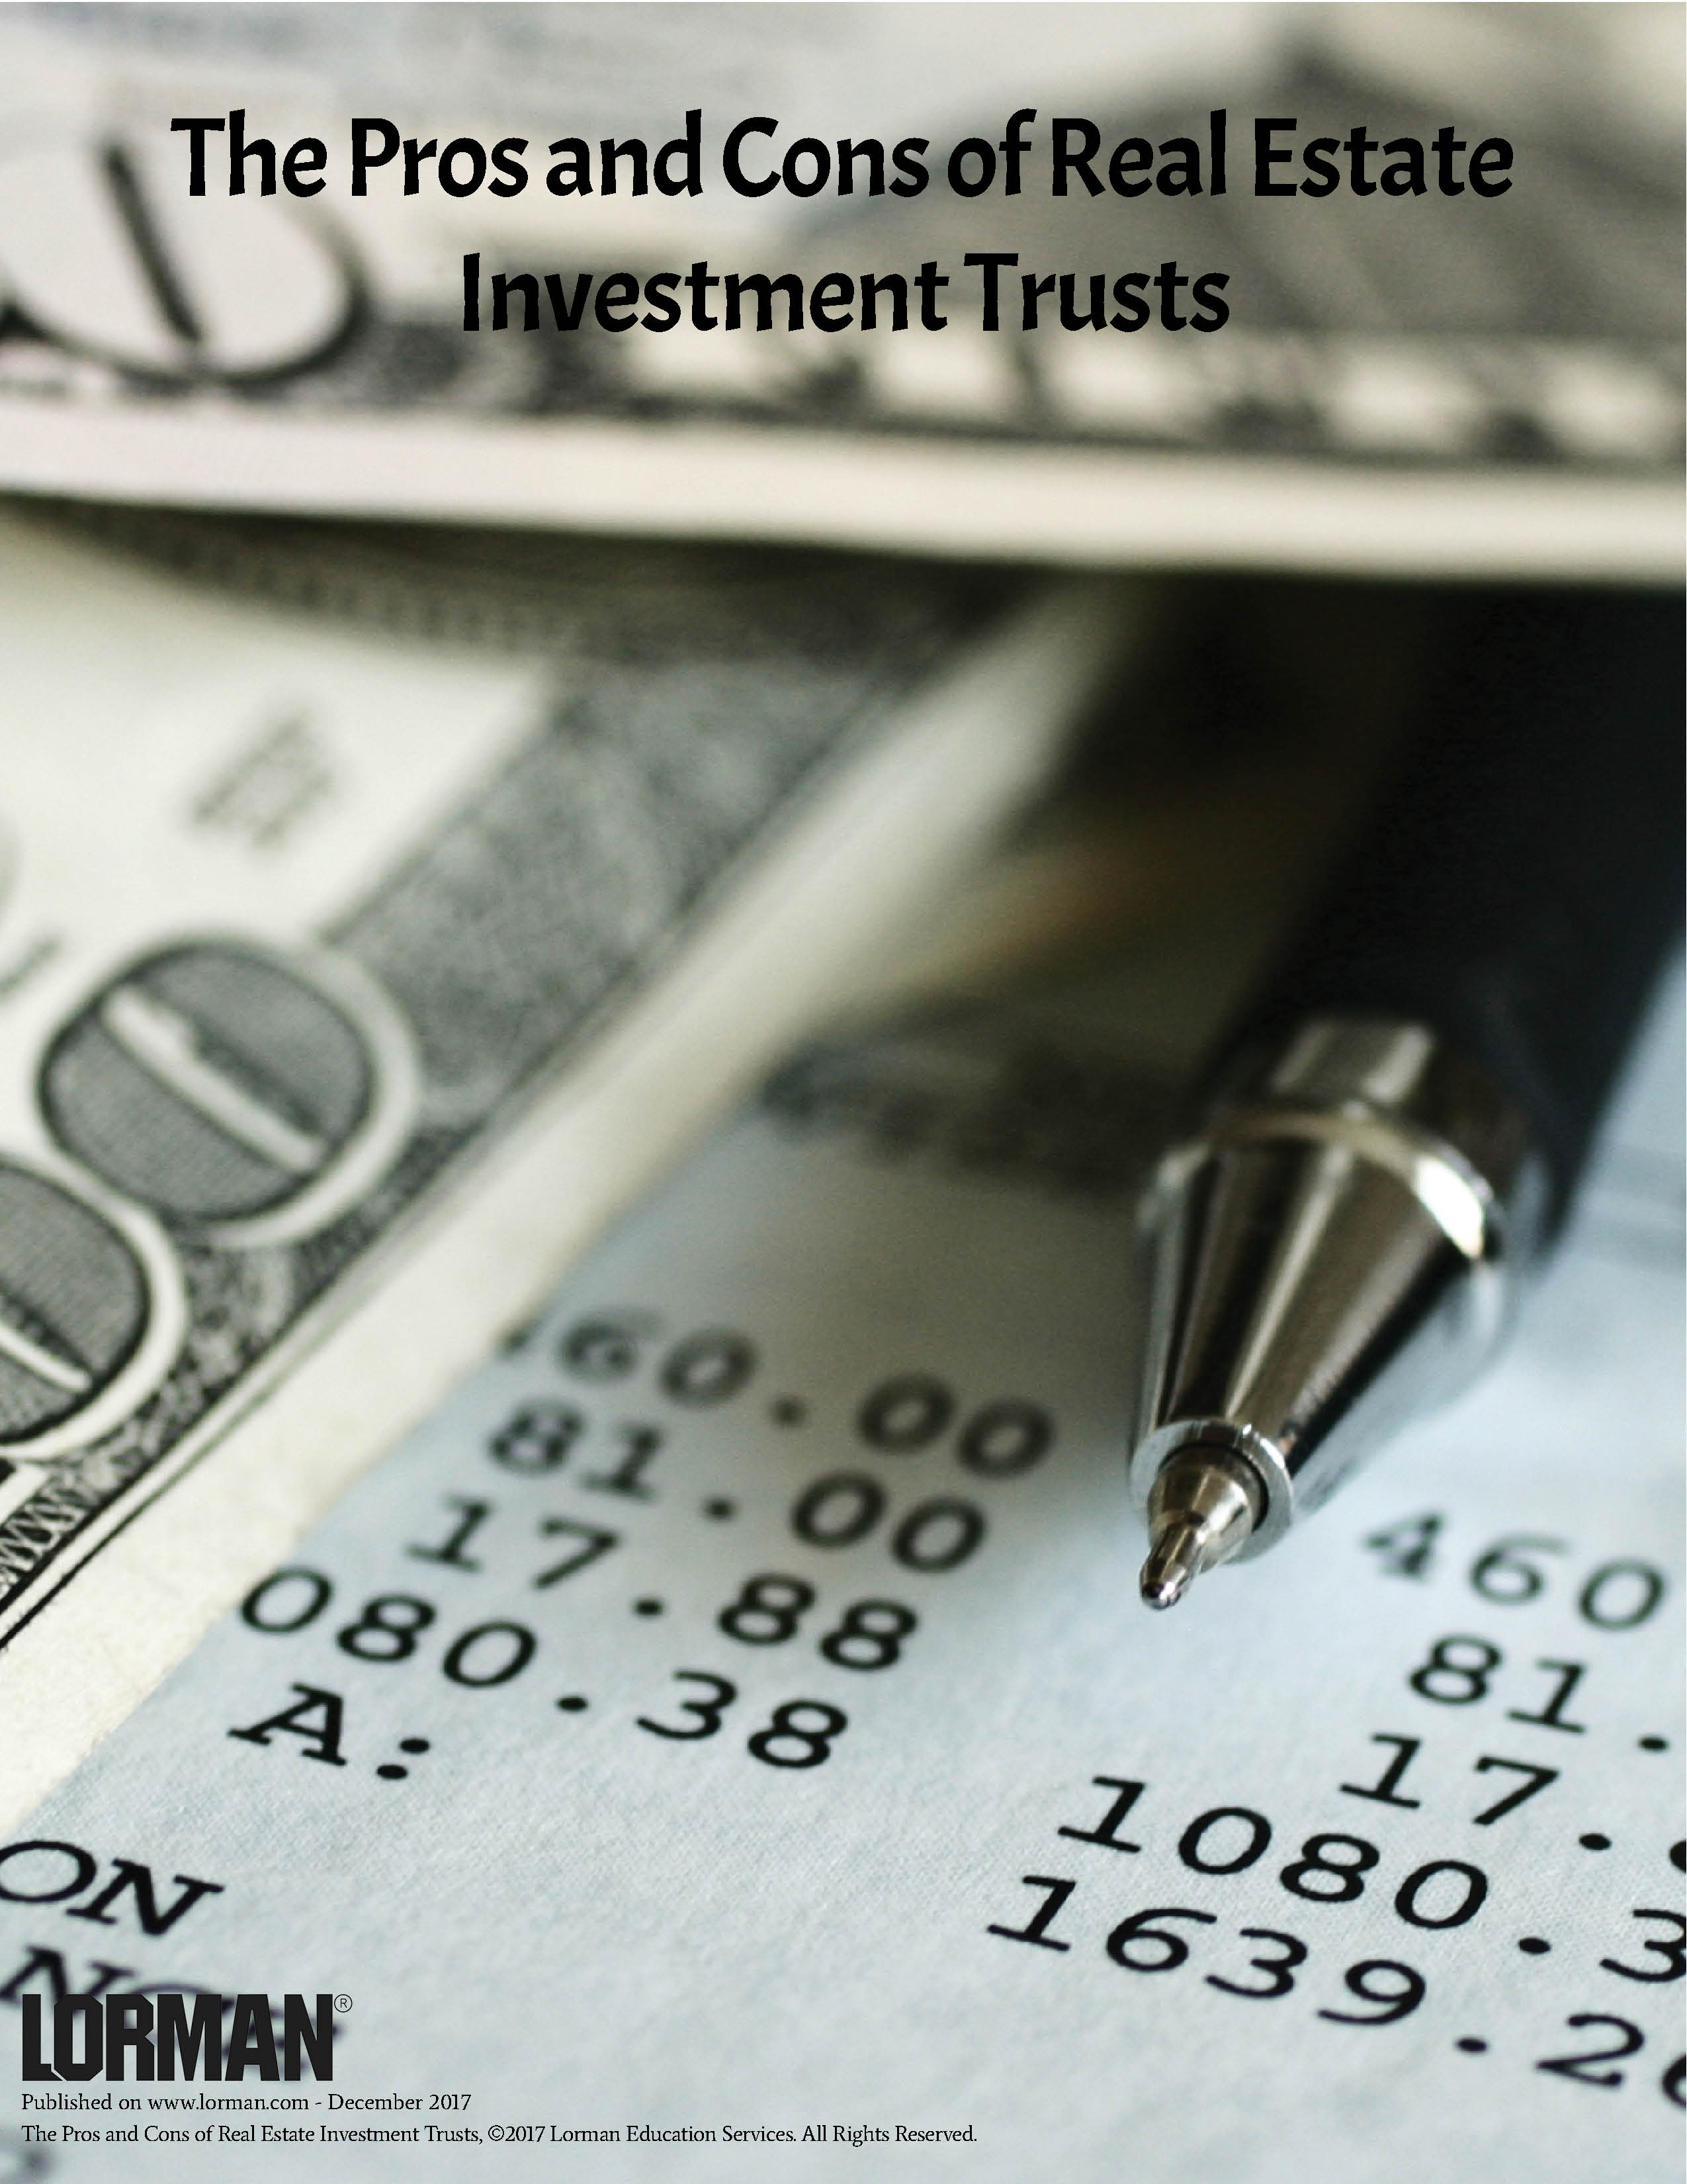 The Pros and Cons of Real Estate Investment Trusts